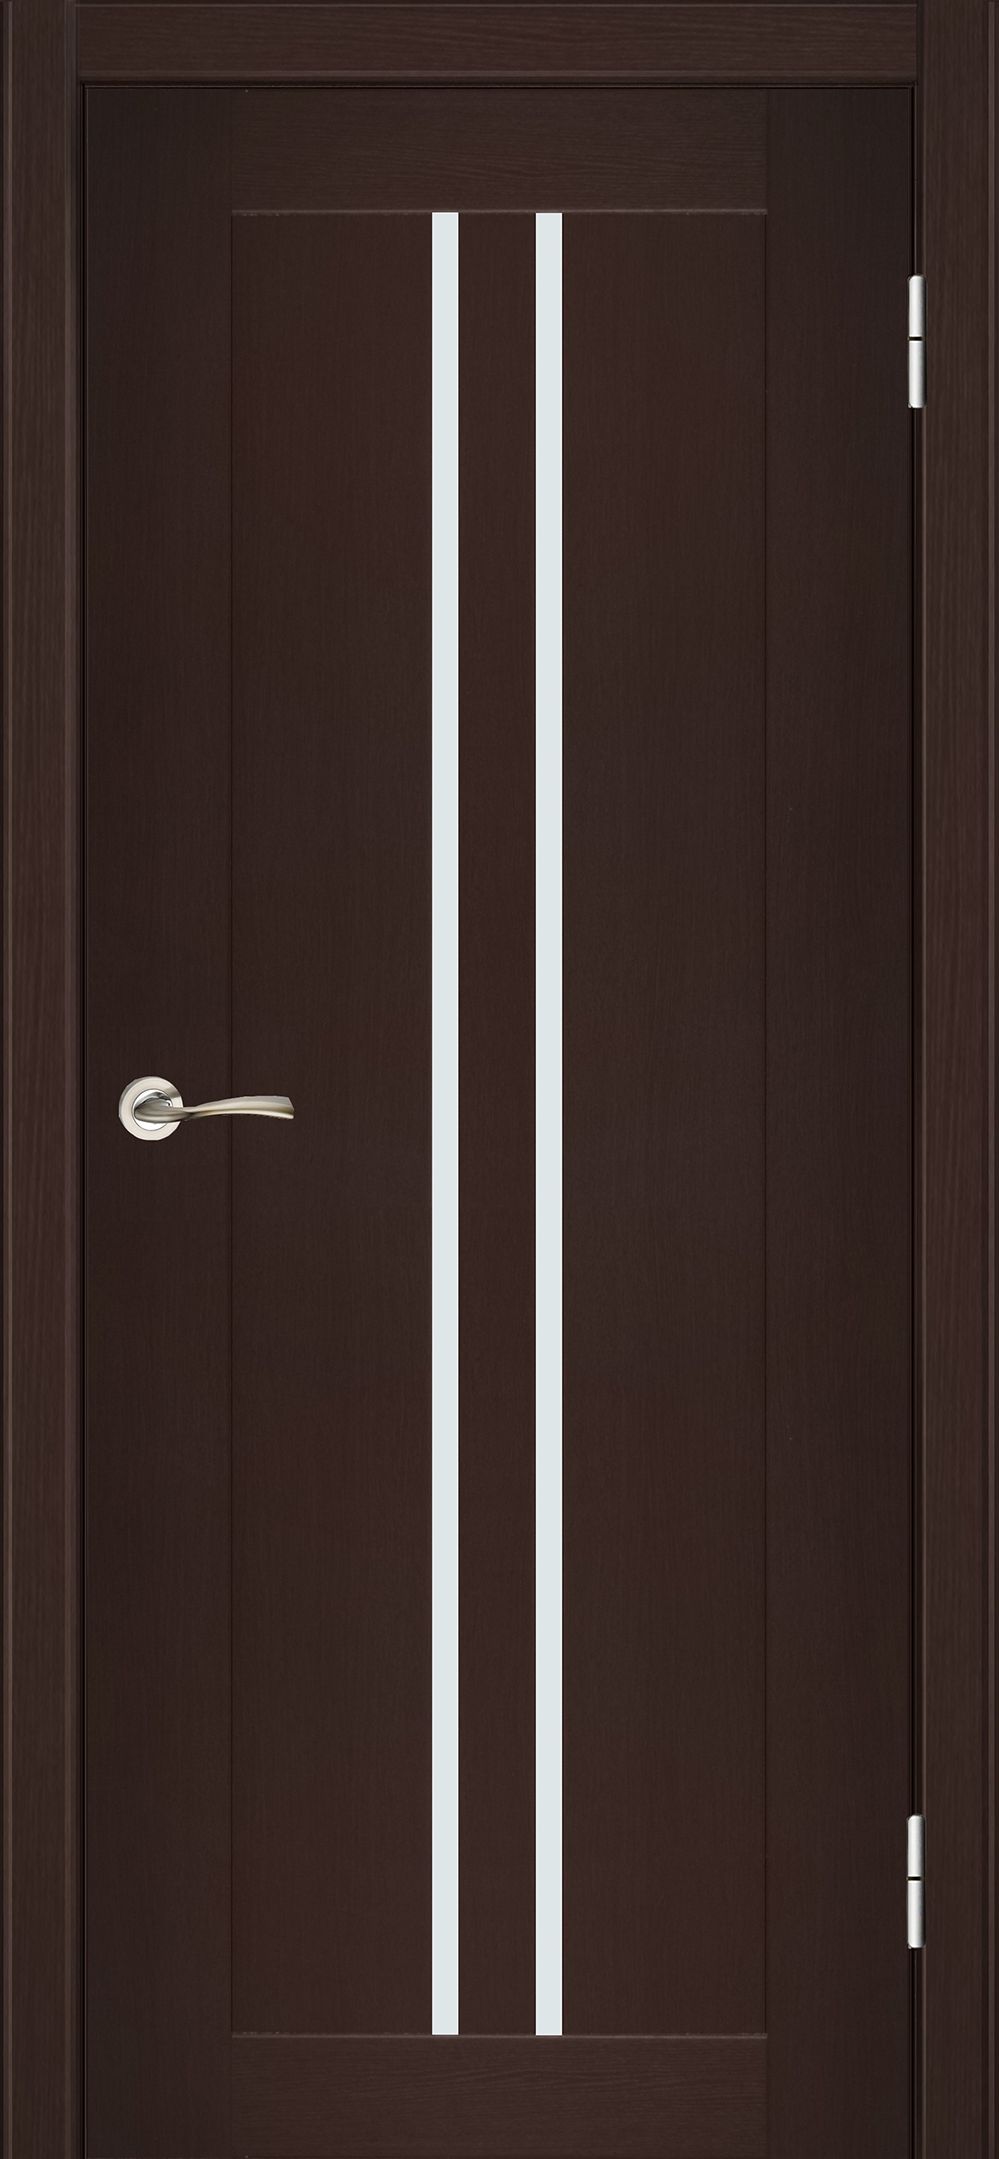 Black door in the style of techno with a narrow white glass